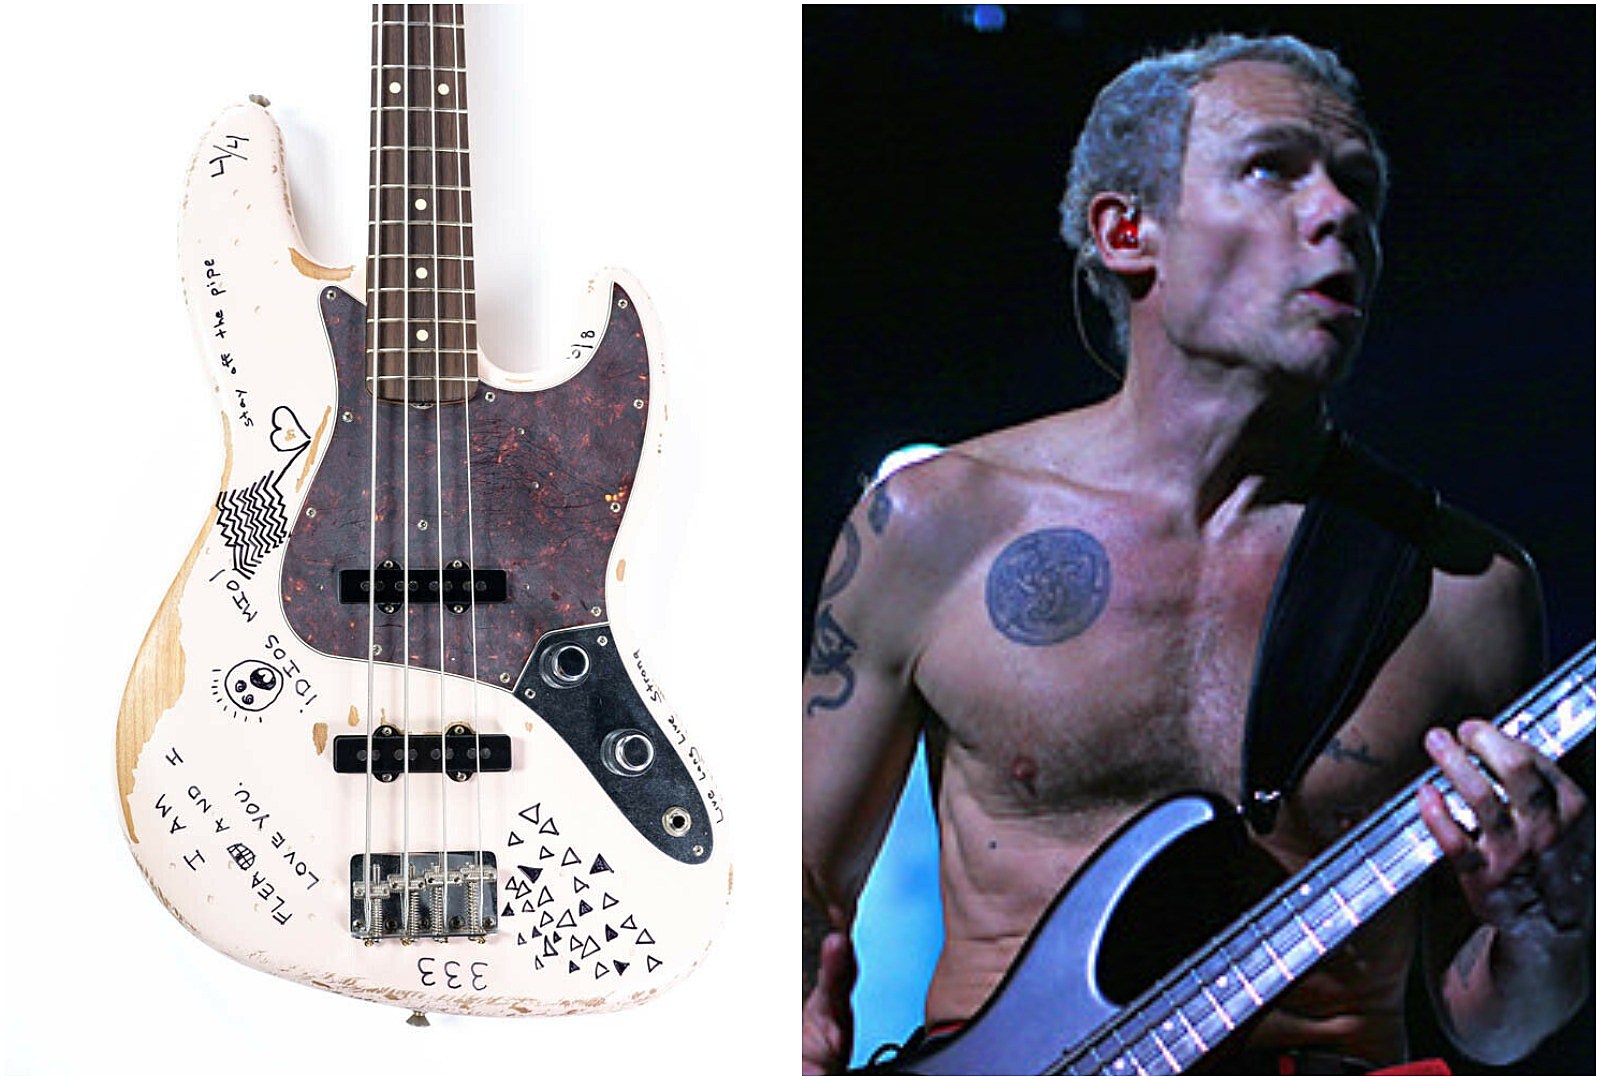 Flea Donates Signature Bass With Hand Drawn Doodles To Charity